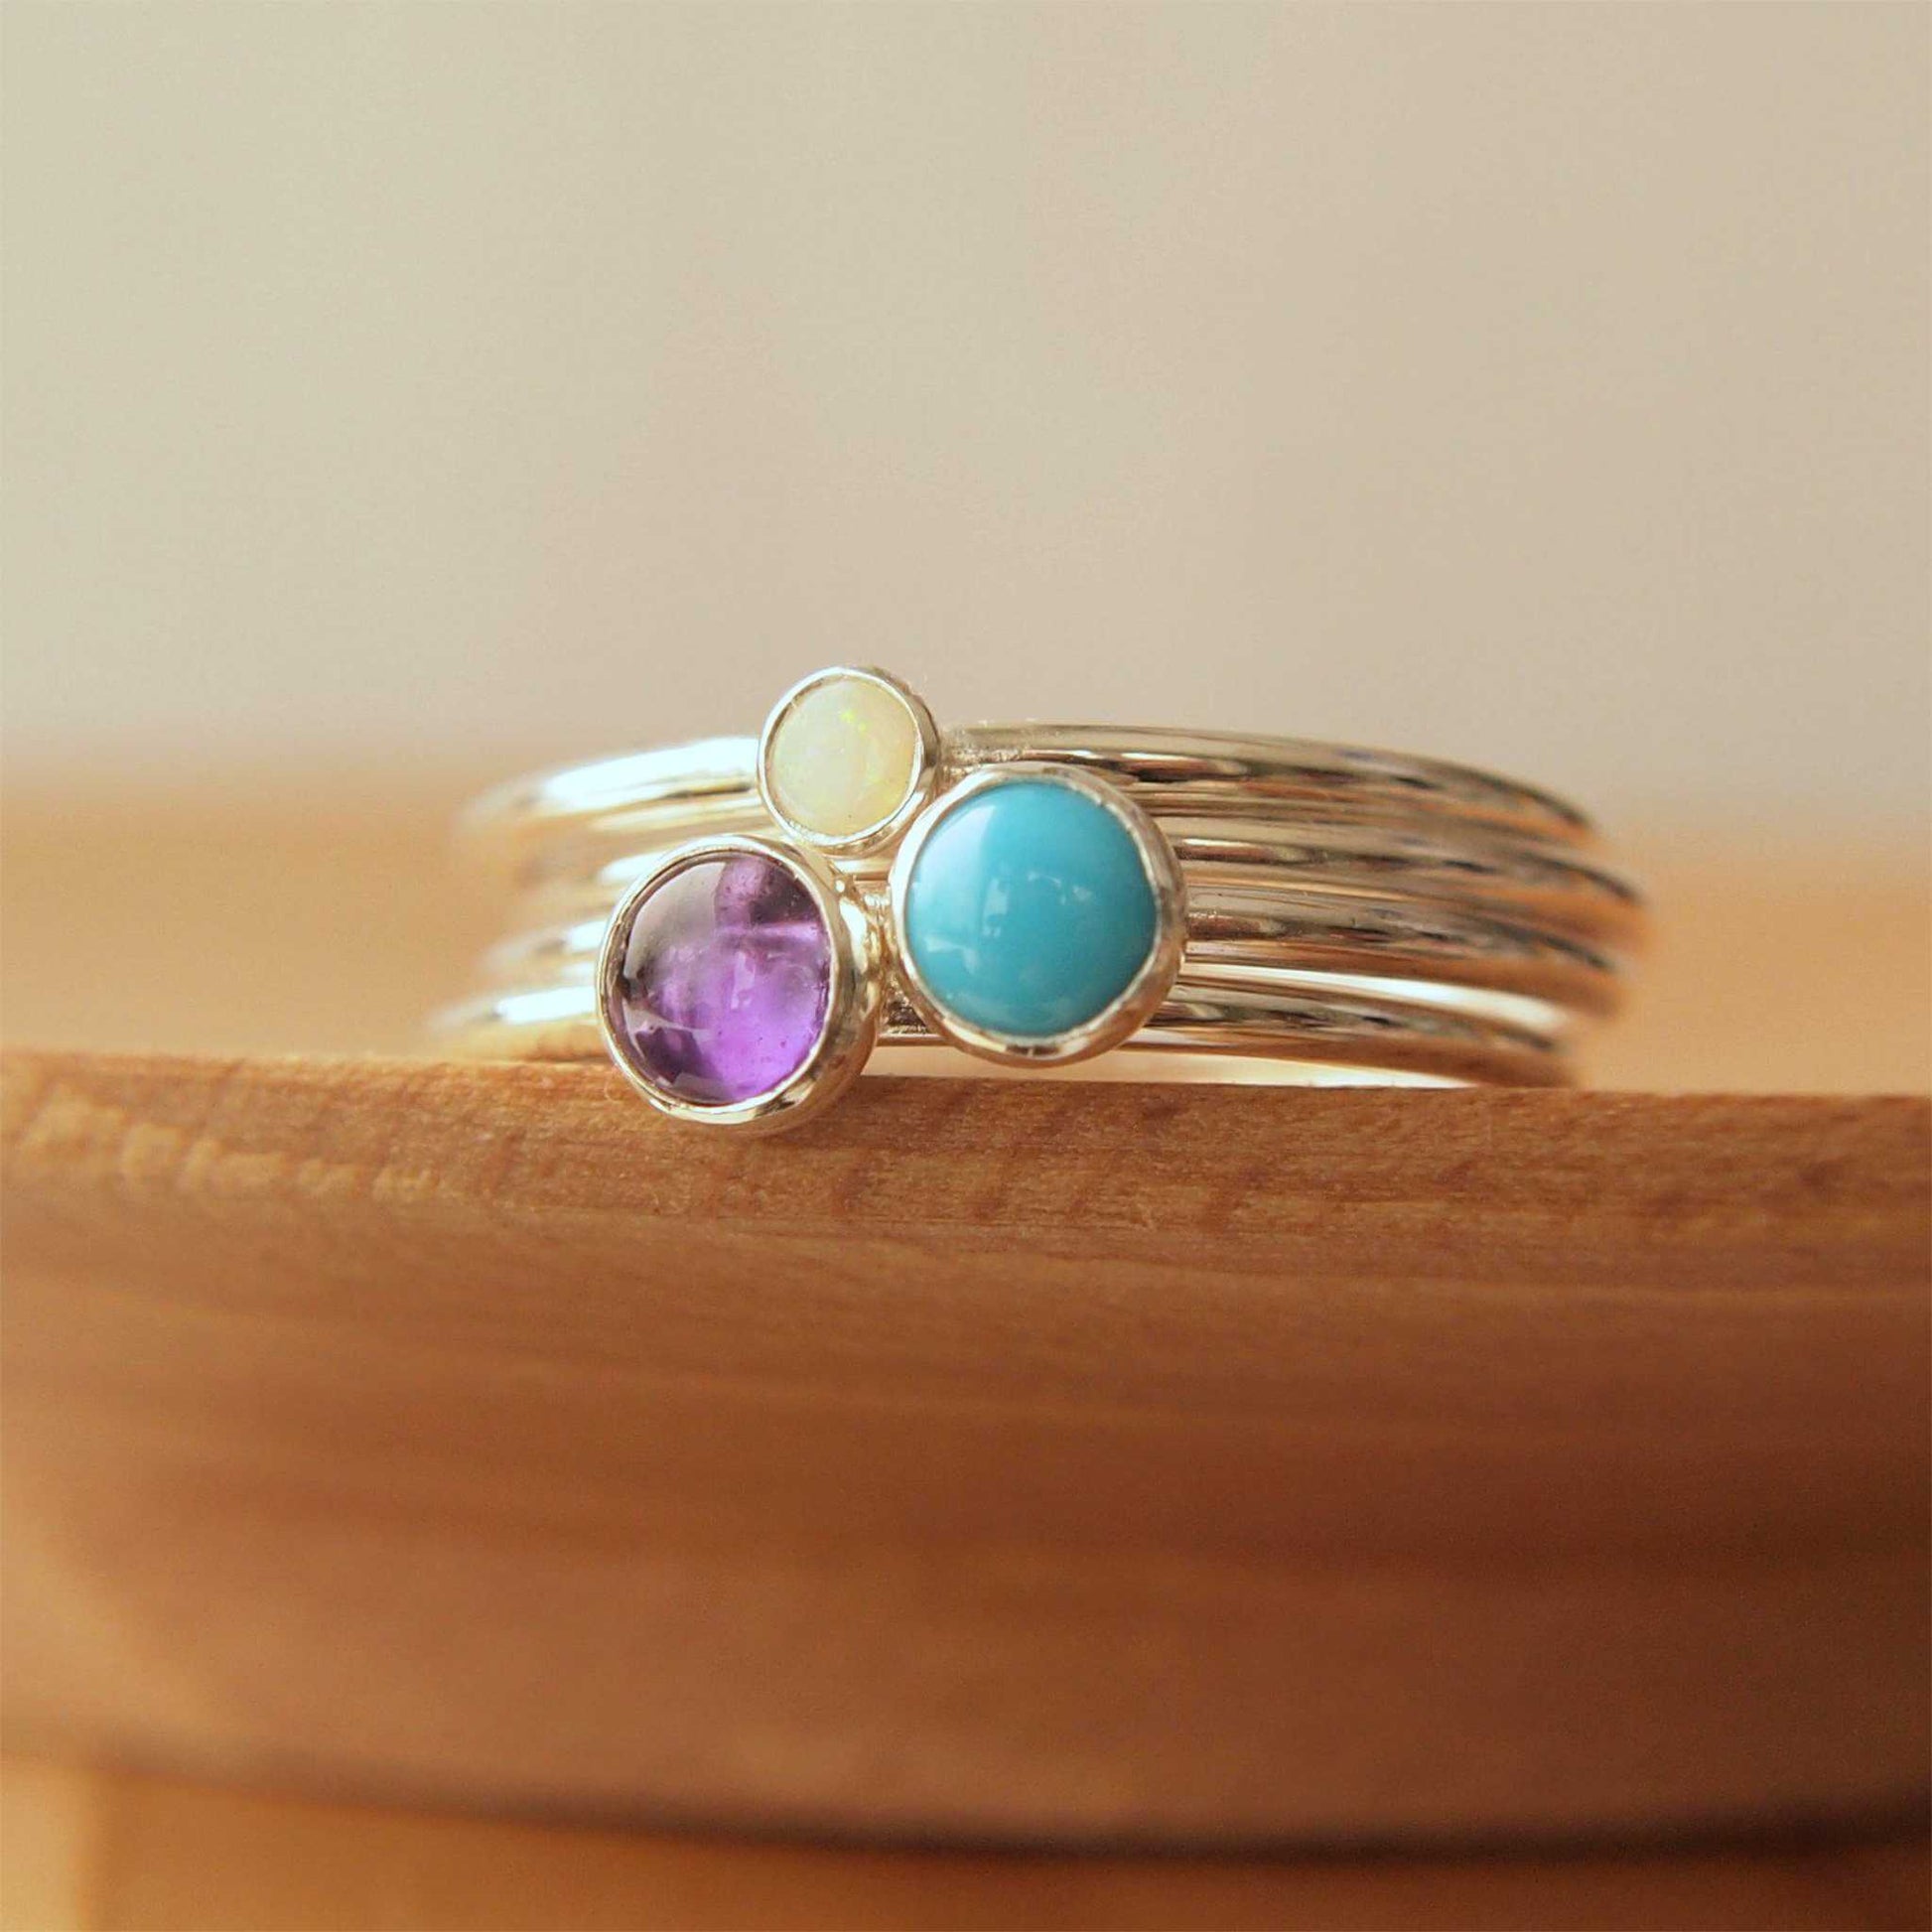 Family Birthstone Ring set with Amethyst, Turquoise and Opal in Sterling Silver. Handmade in Scotland by maram jewellery